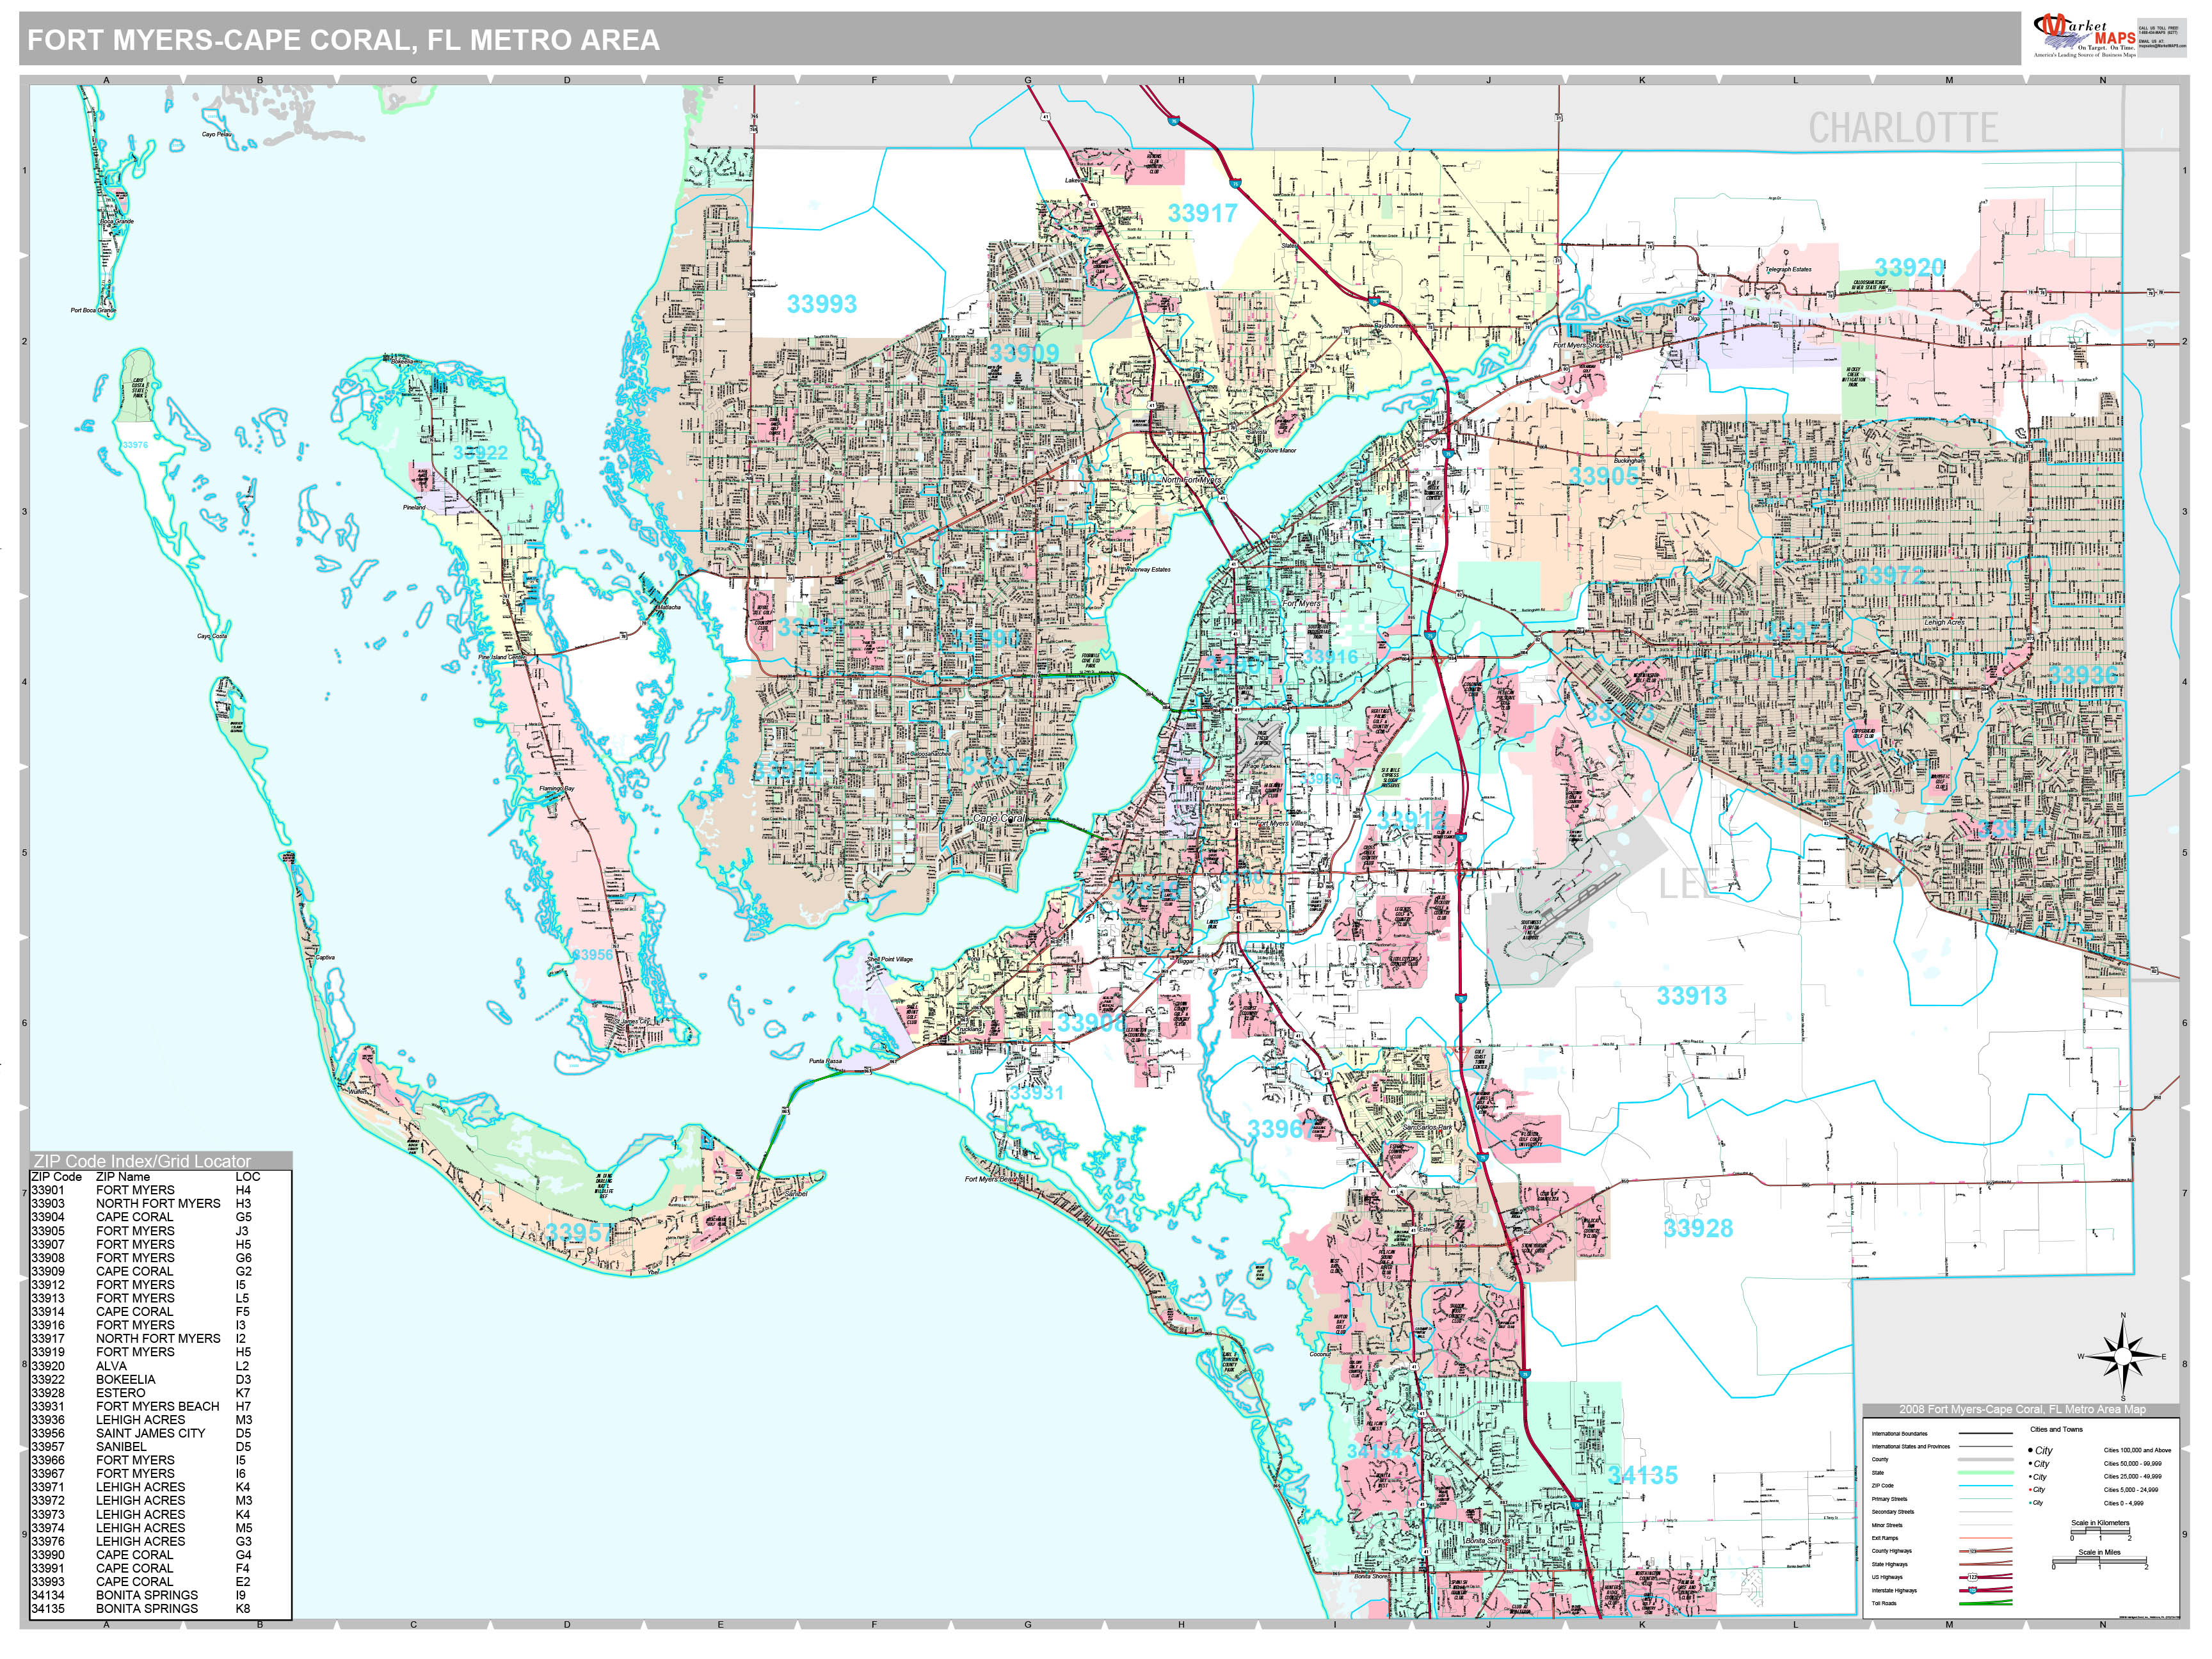 Fort Myers Cape Coral Fl Metro Area Wall Map Premium Style By Marketmaps